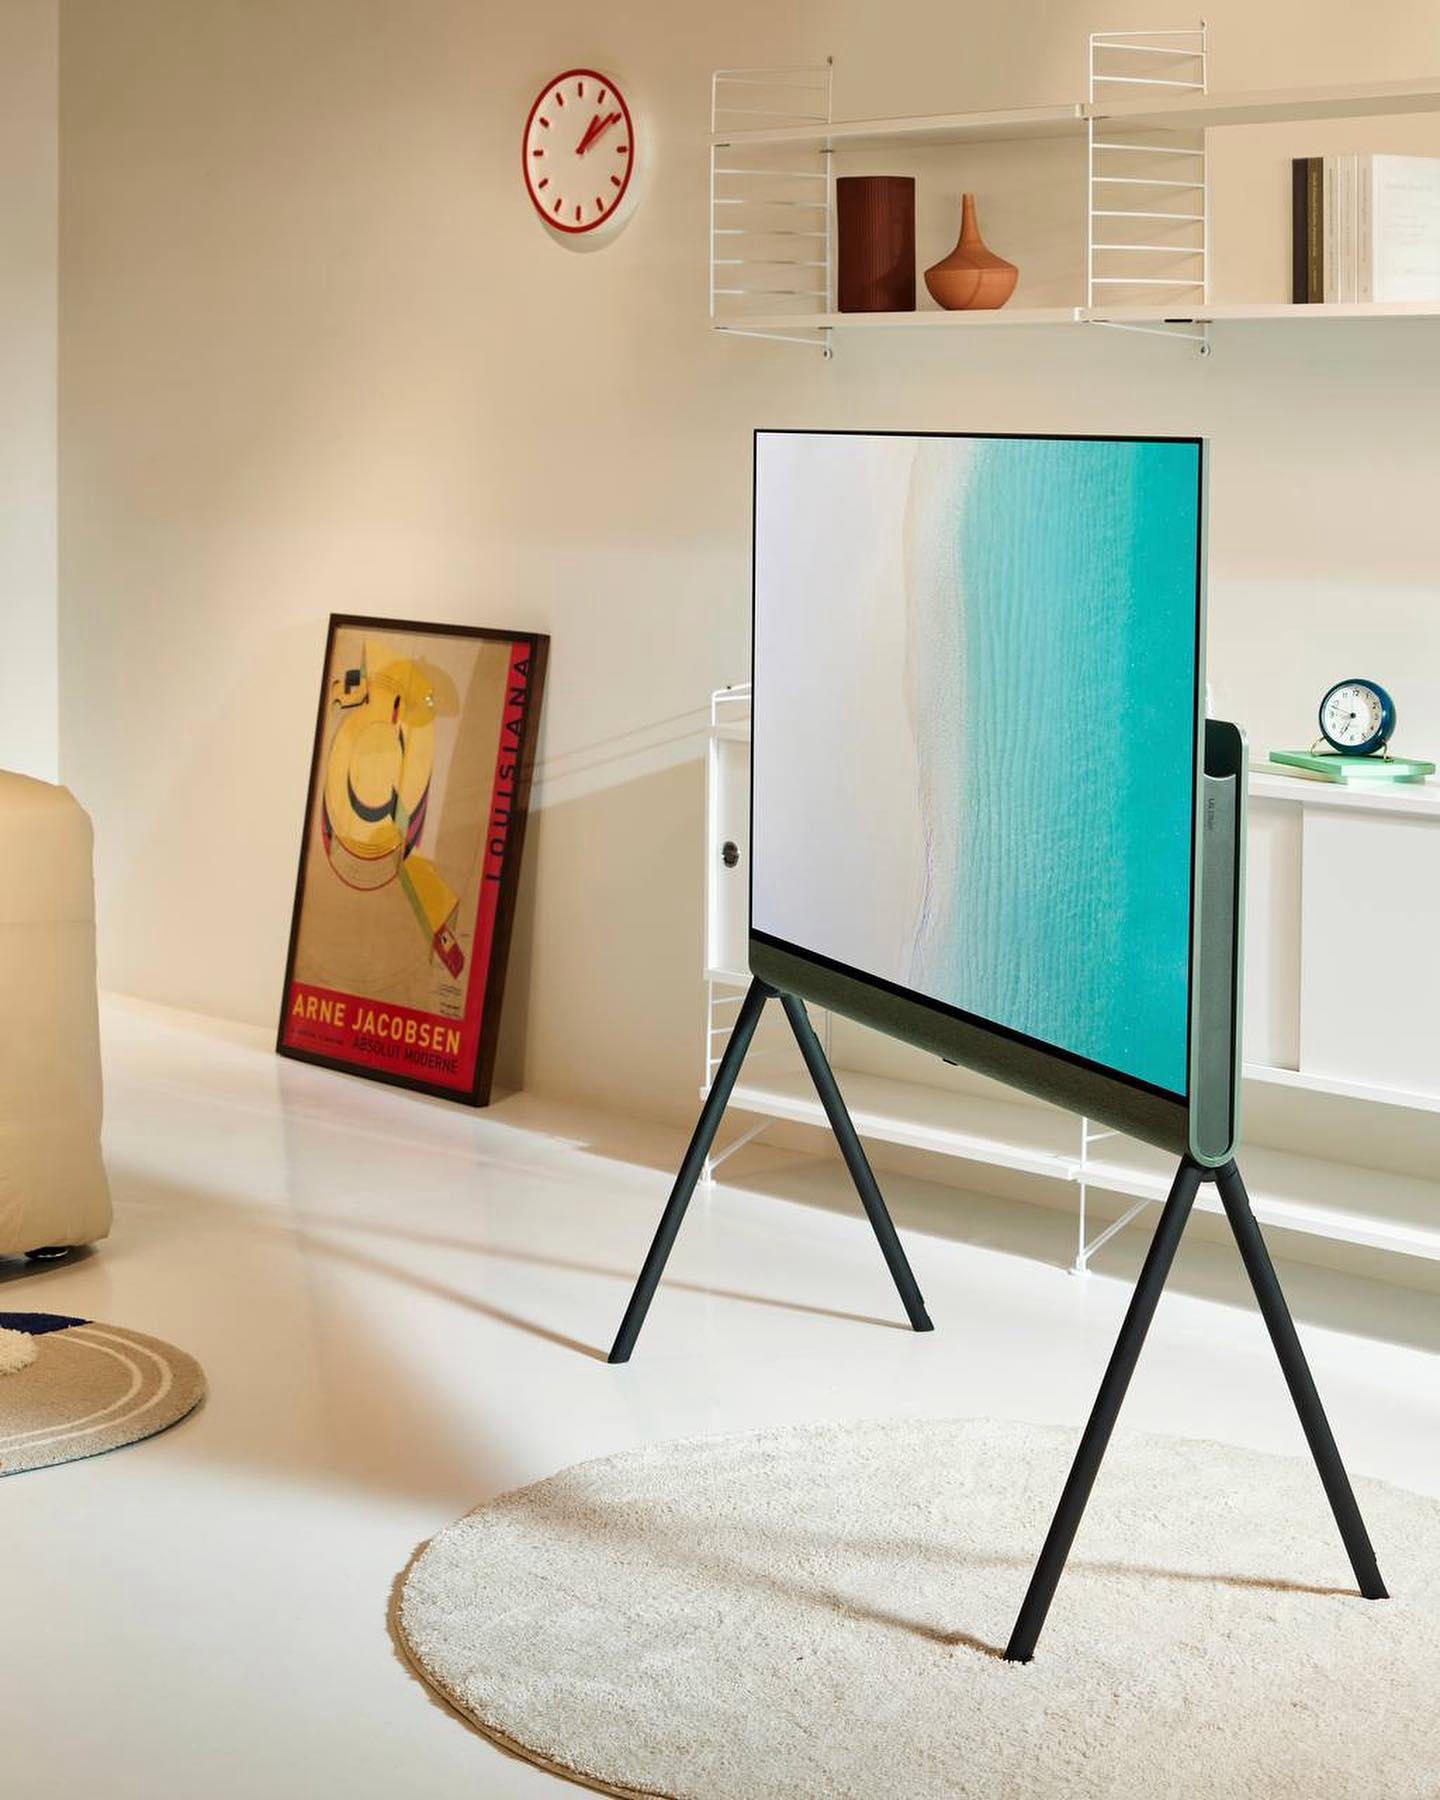 Lordd_Products - Searching for TV other than wall mounting or standing